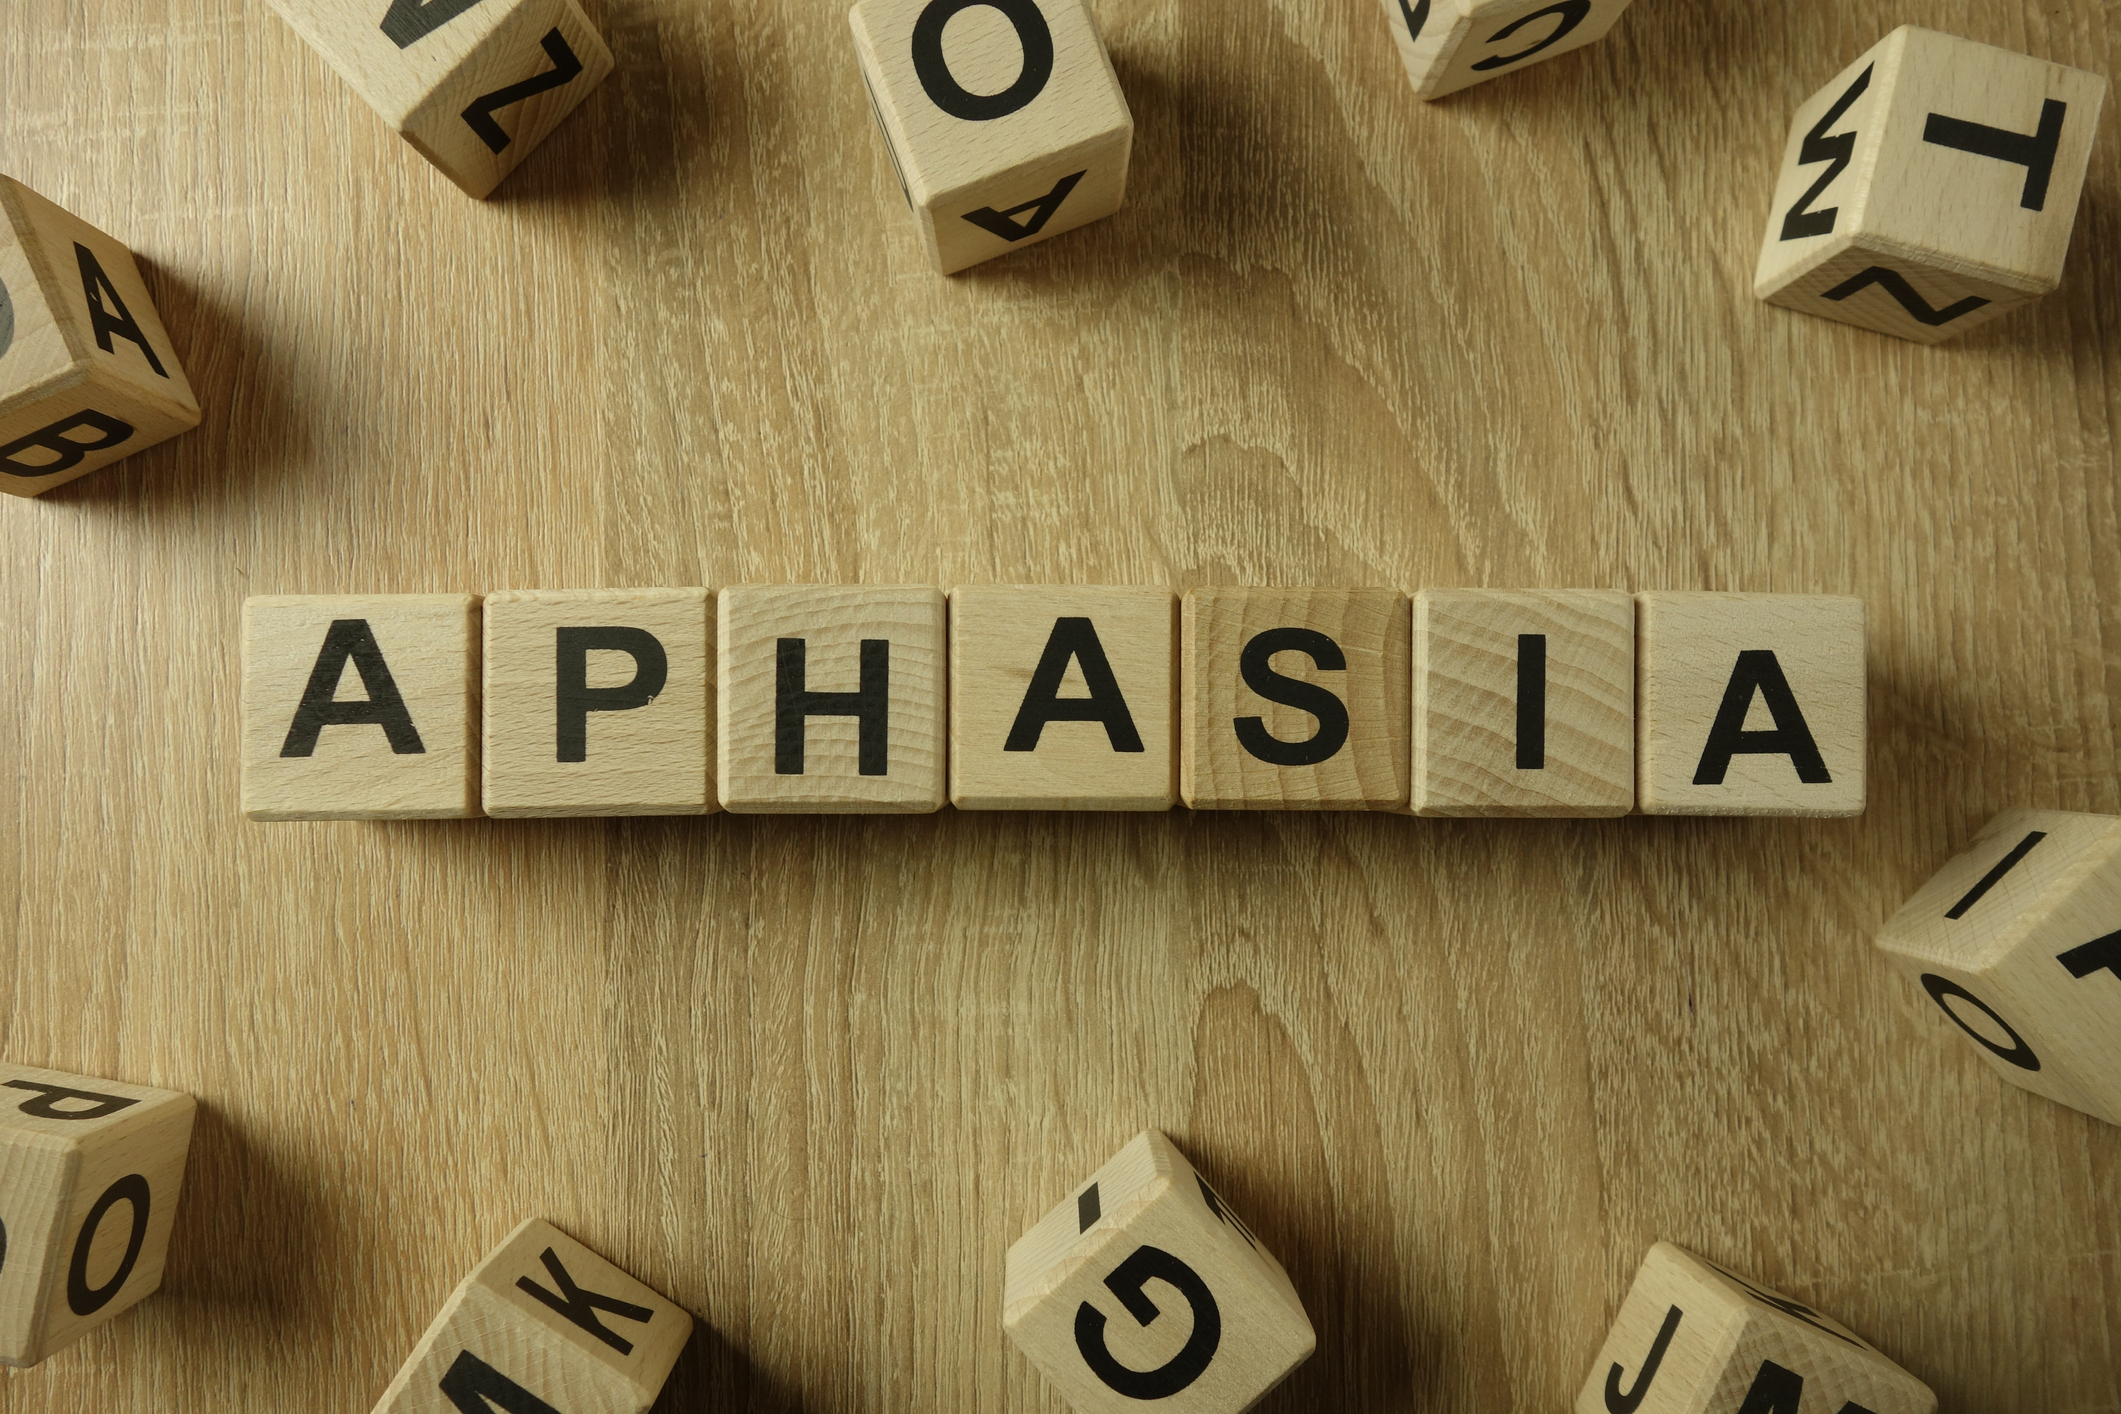 Aphasia: The disorder that steals your ability to communicate